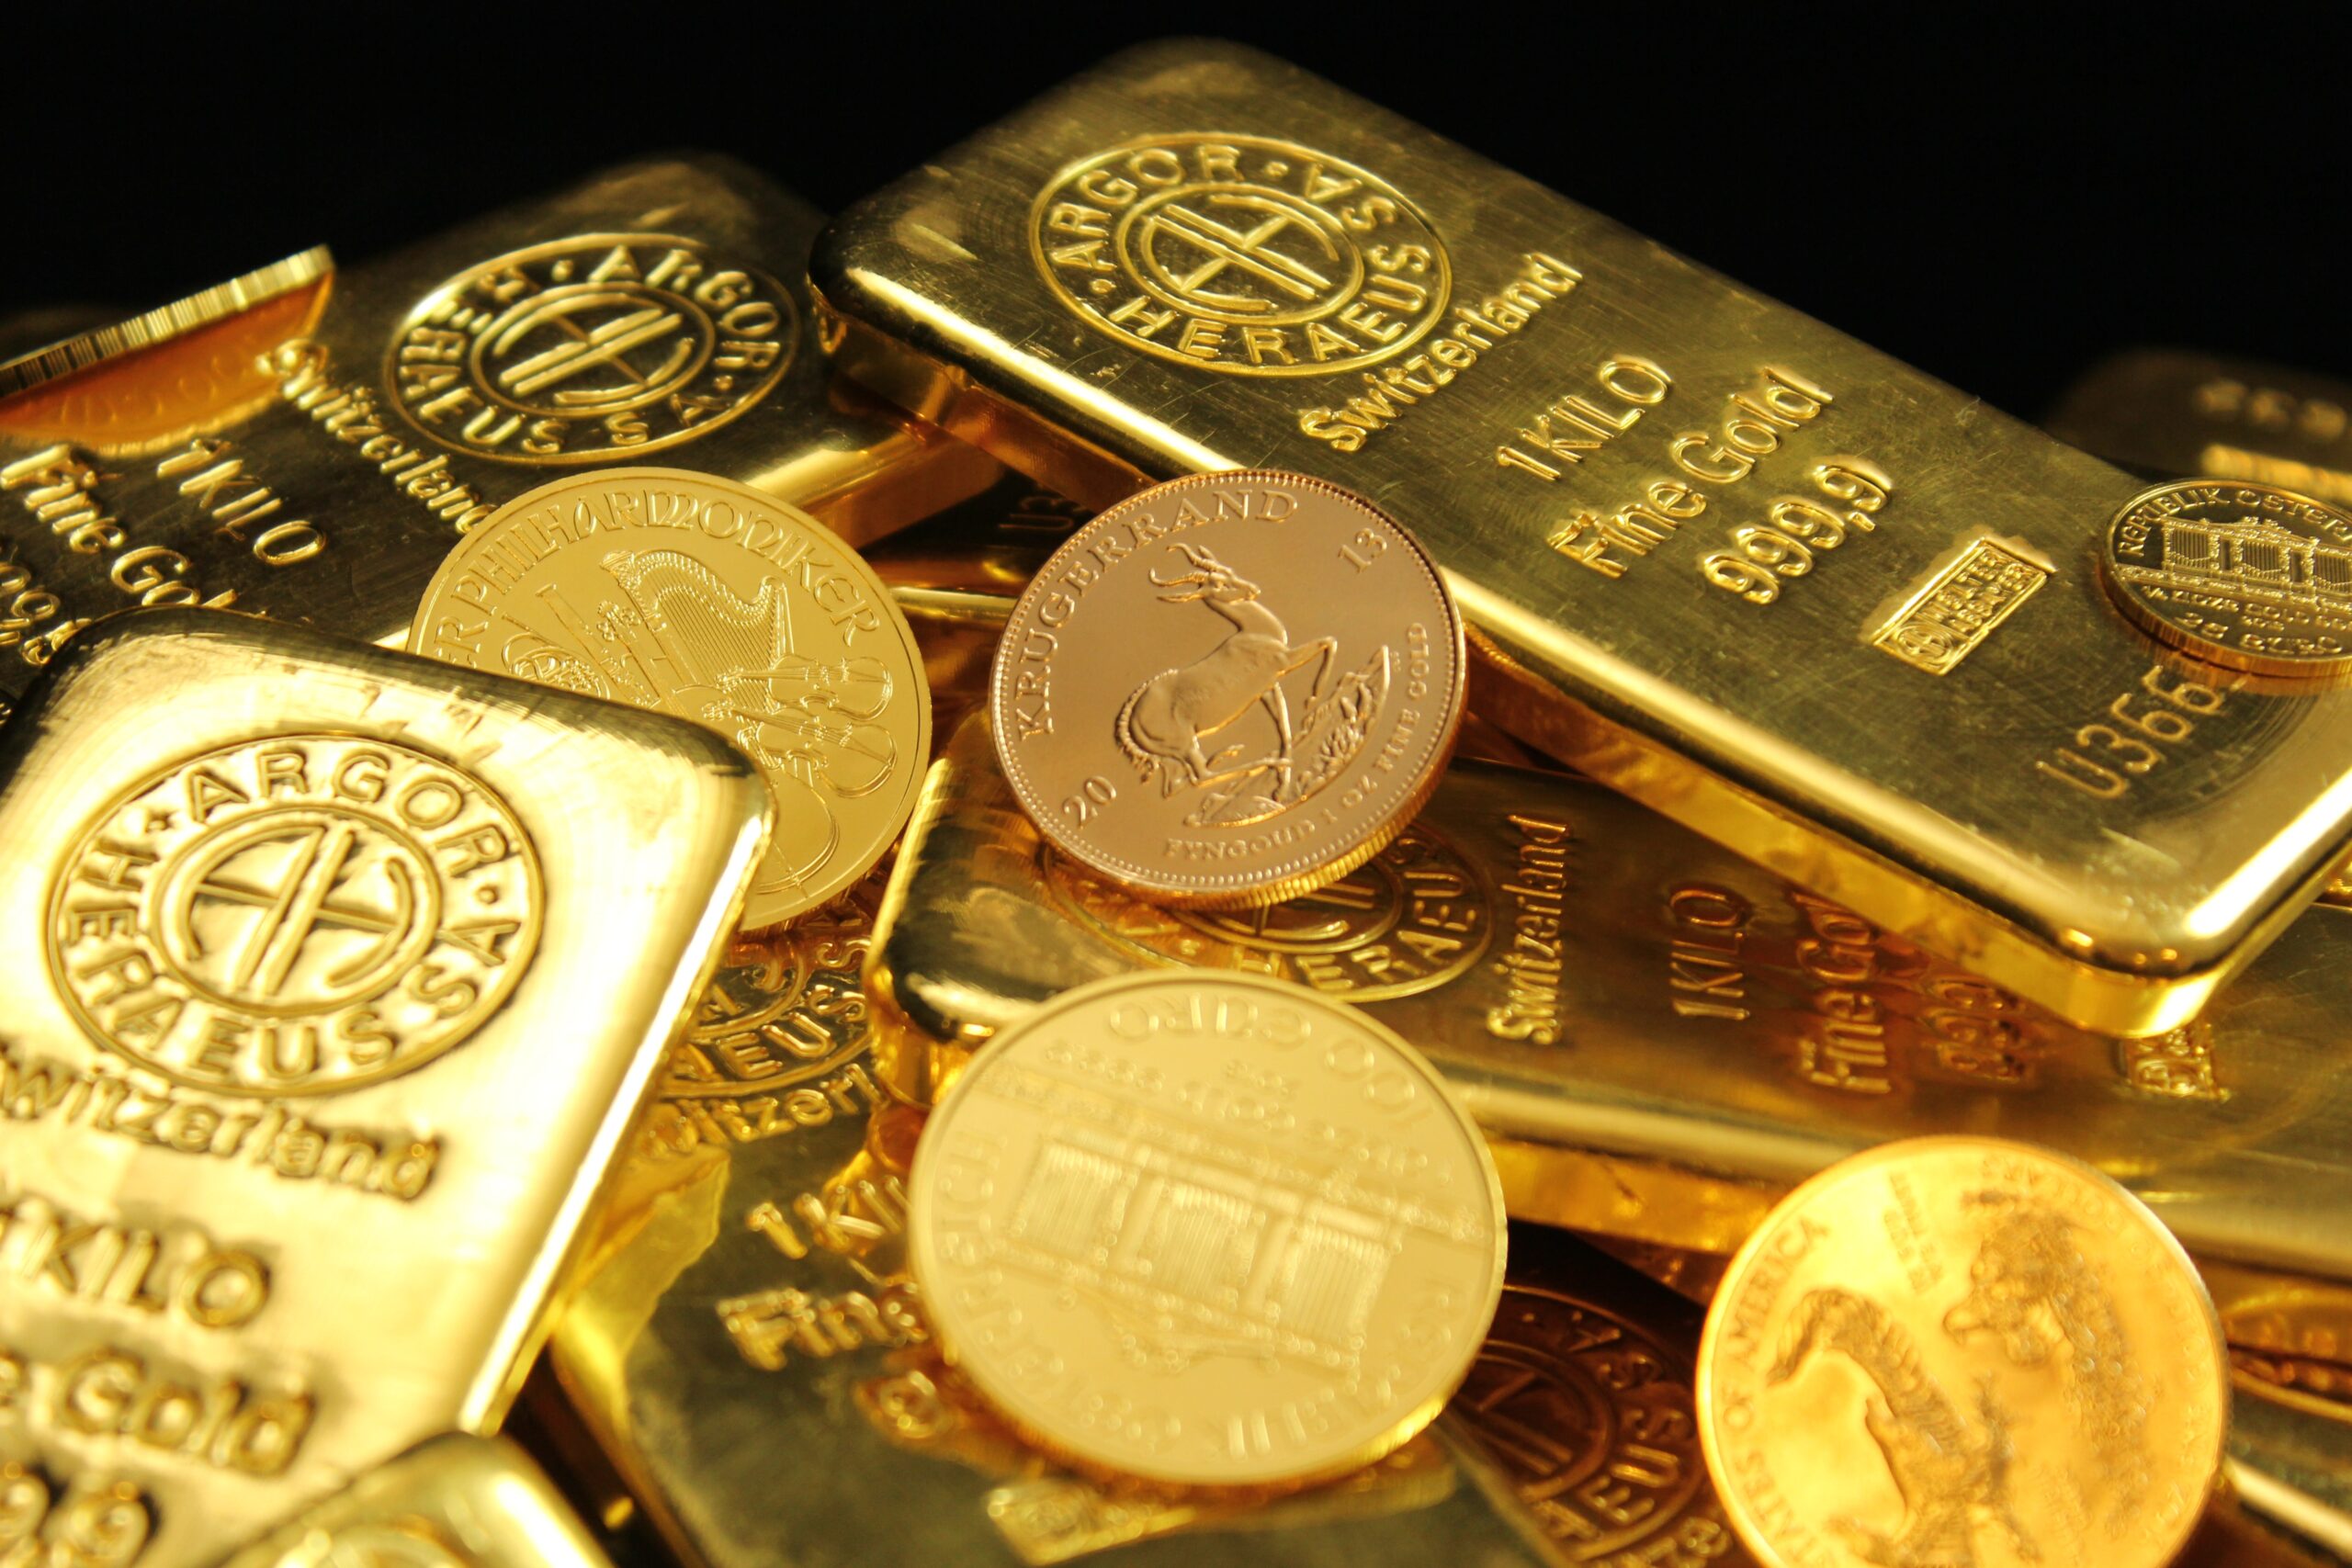 Augusta Precious Metals Pros and Cons: What Are the Advantages and Disadvantages of Investing with Augusta Precious Metals?